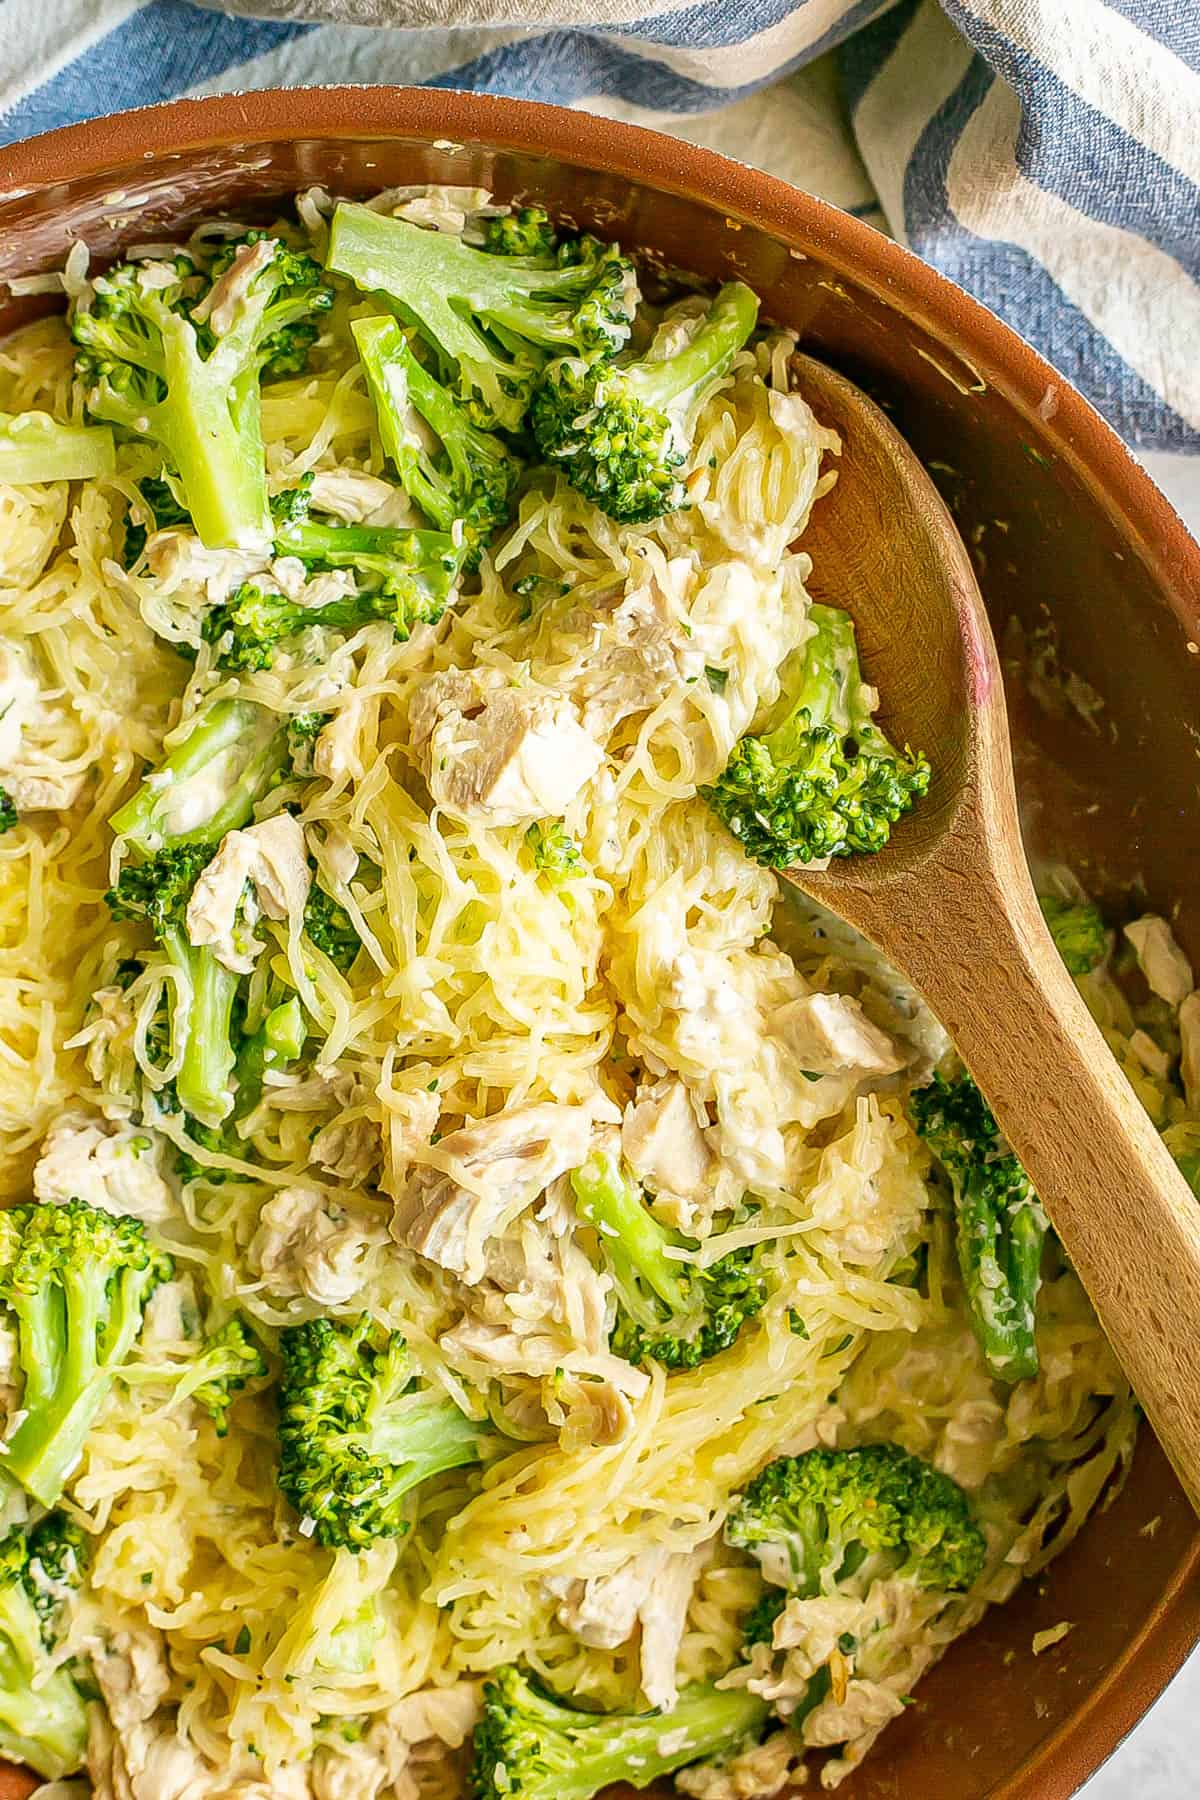 A wooden spoon resting in a skillet of spaghetti squash, chicken and broccoli with a light creamy sauce.